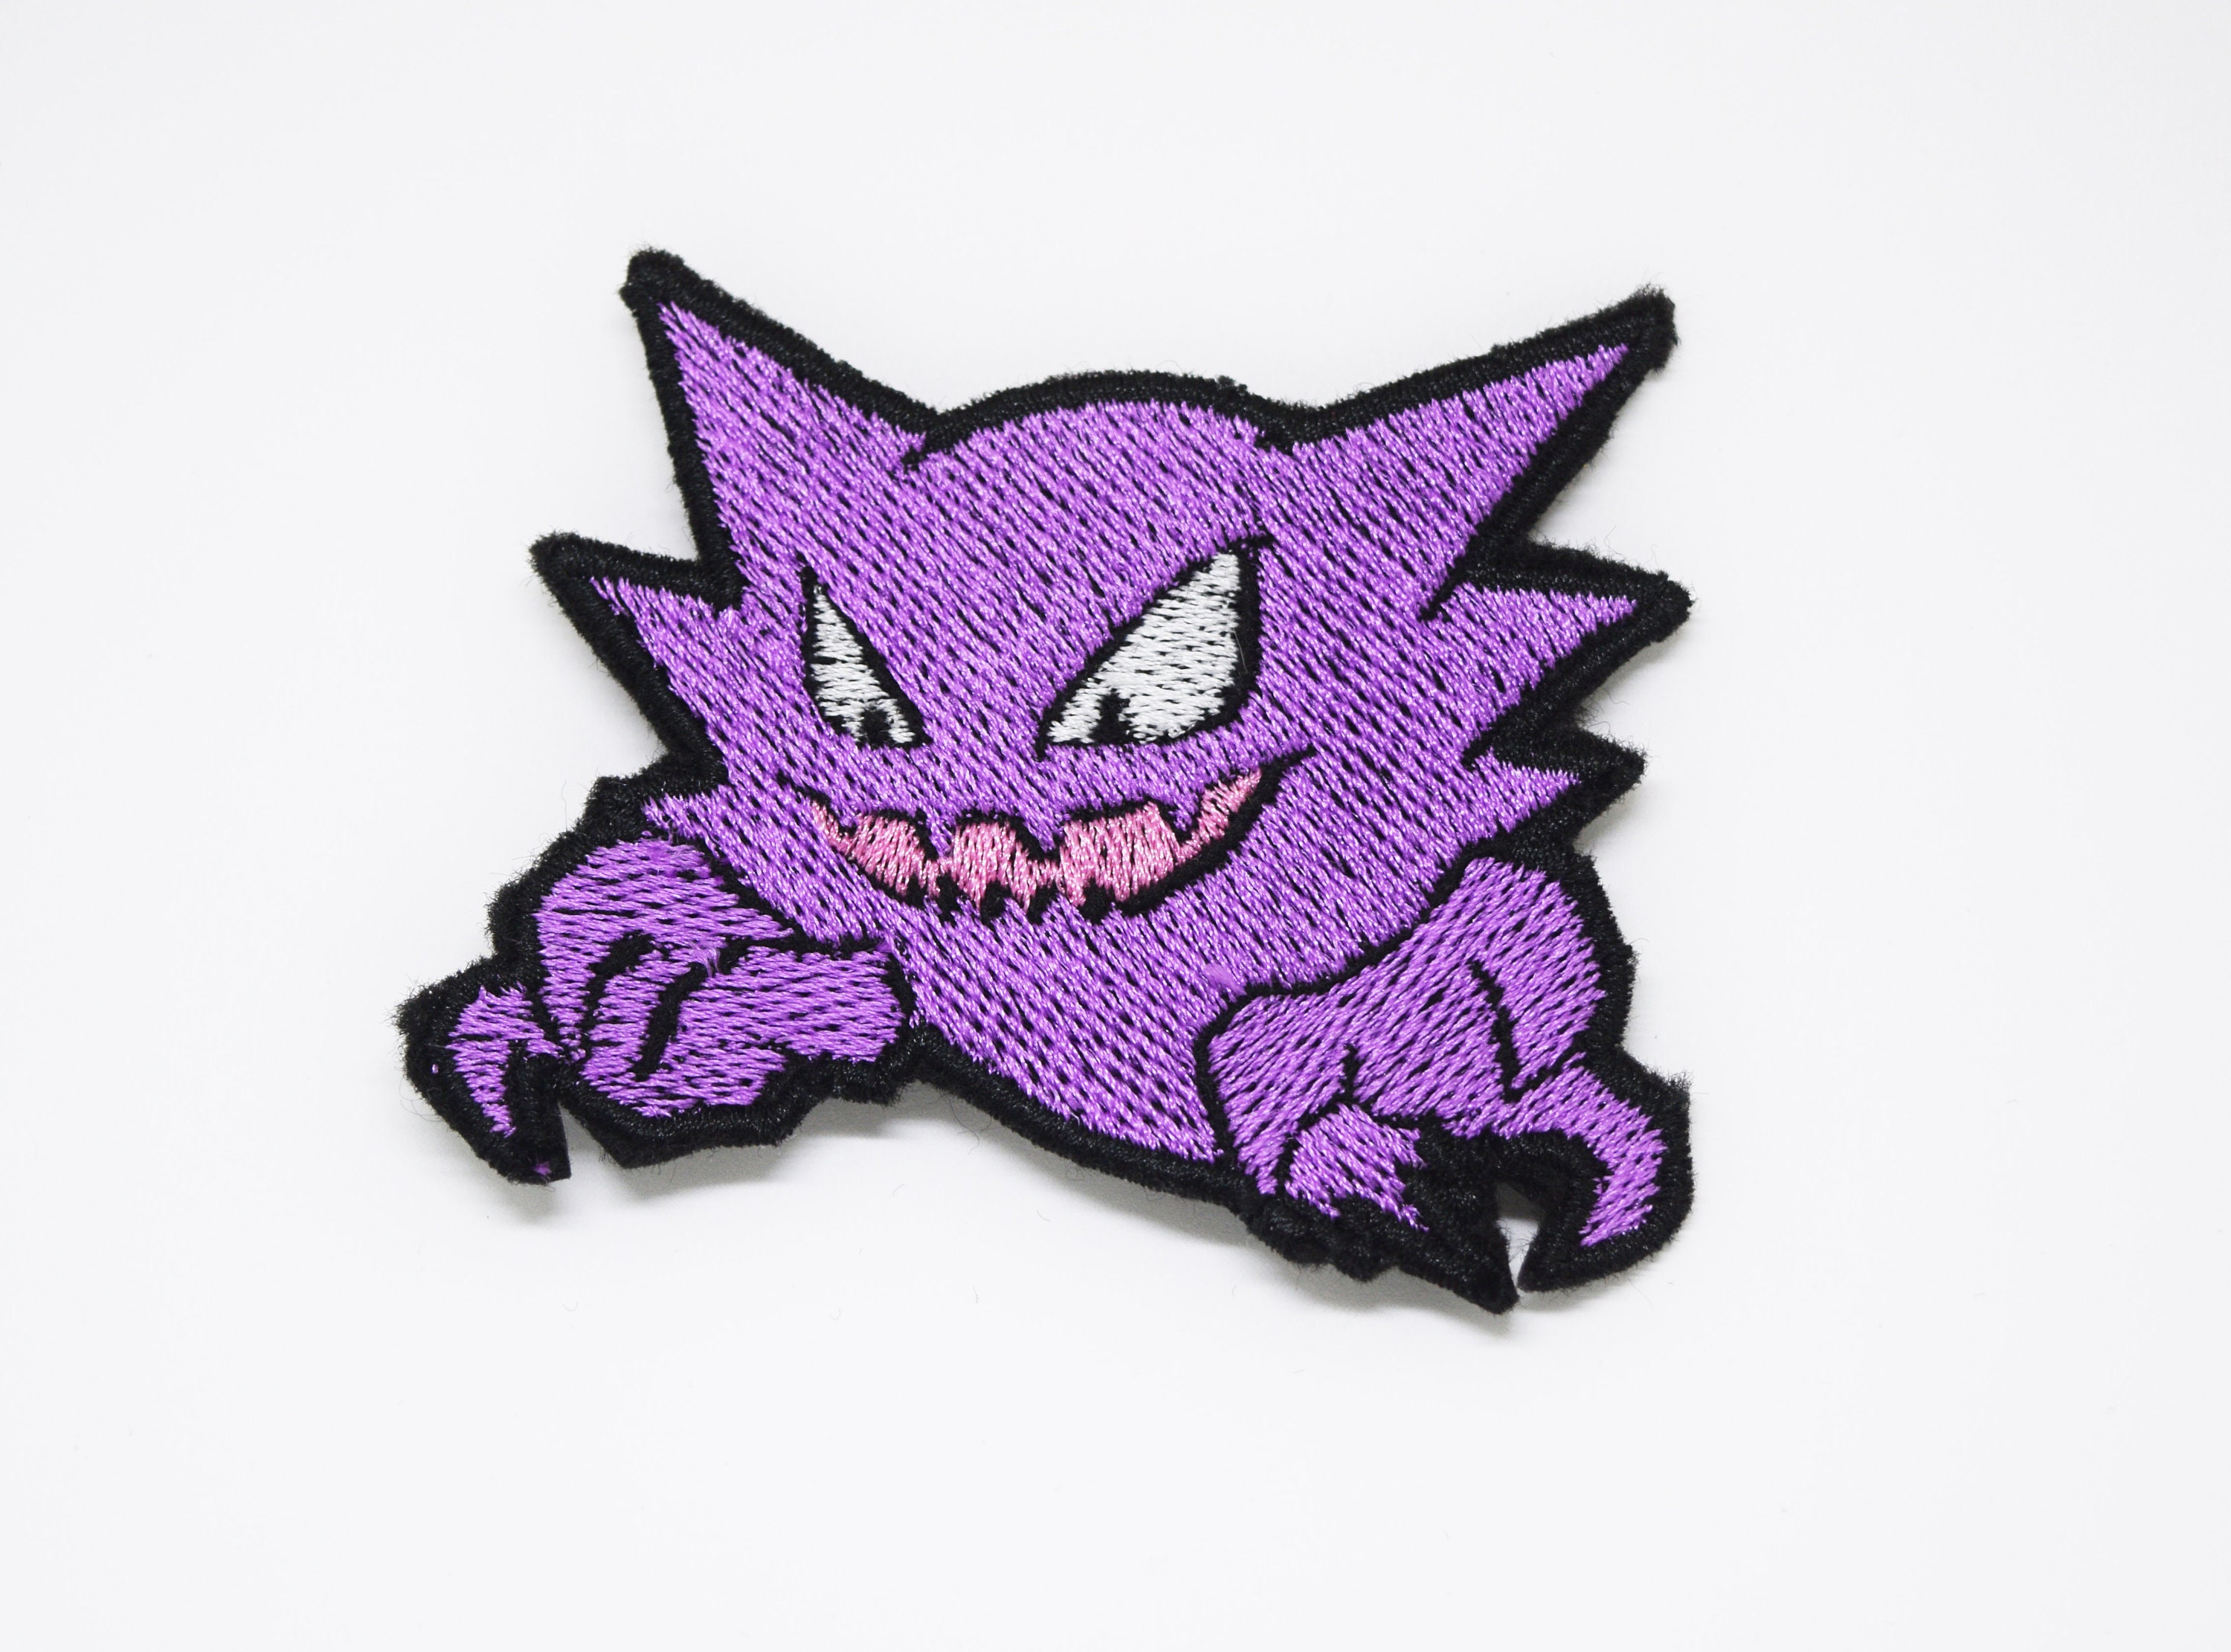 Chandelure Iron on Patch Metallic Embroidered. Pokemon Patch. 